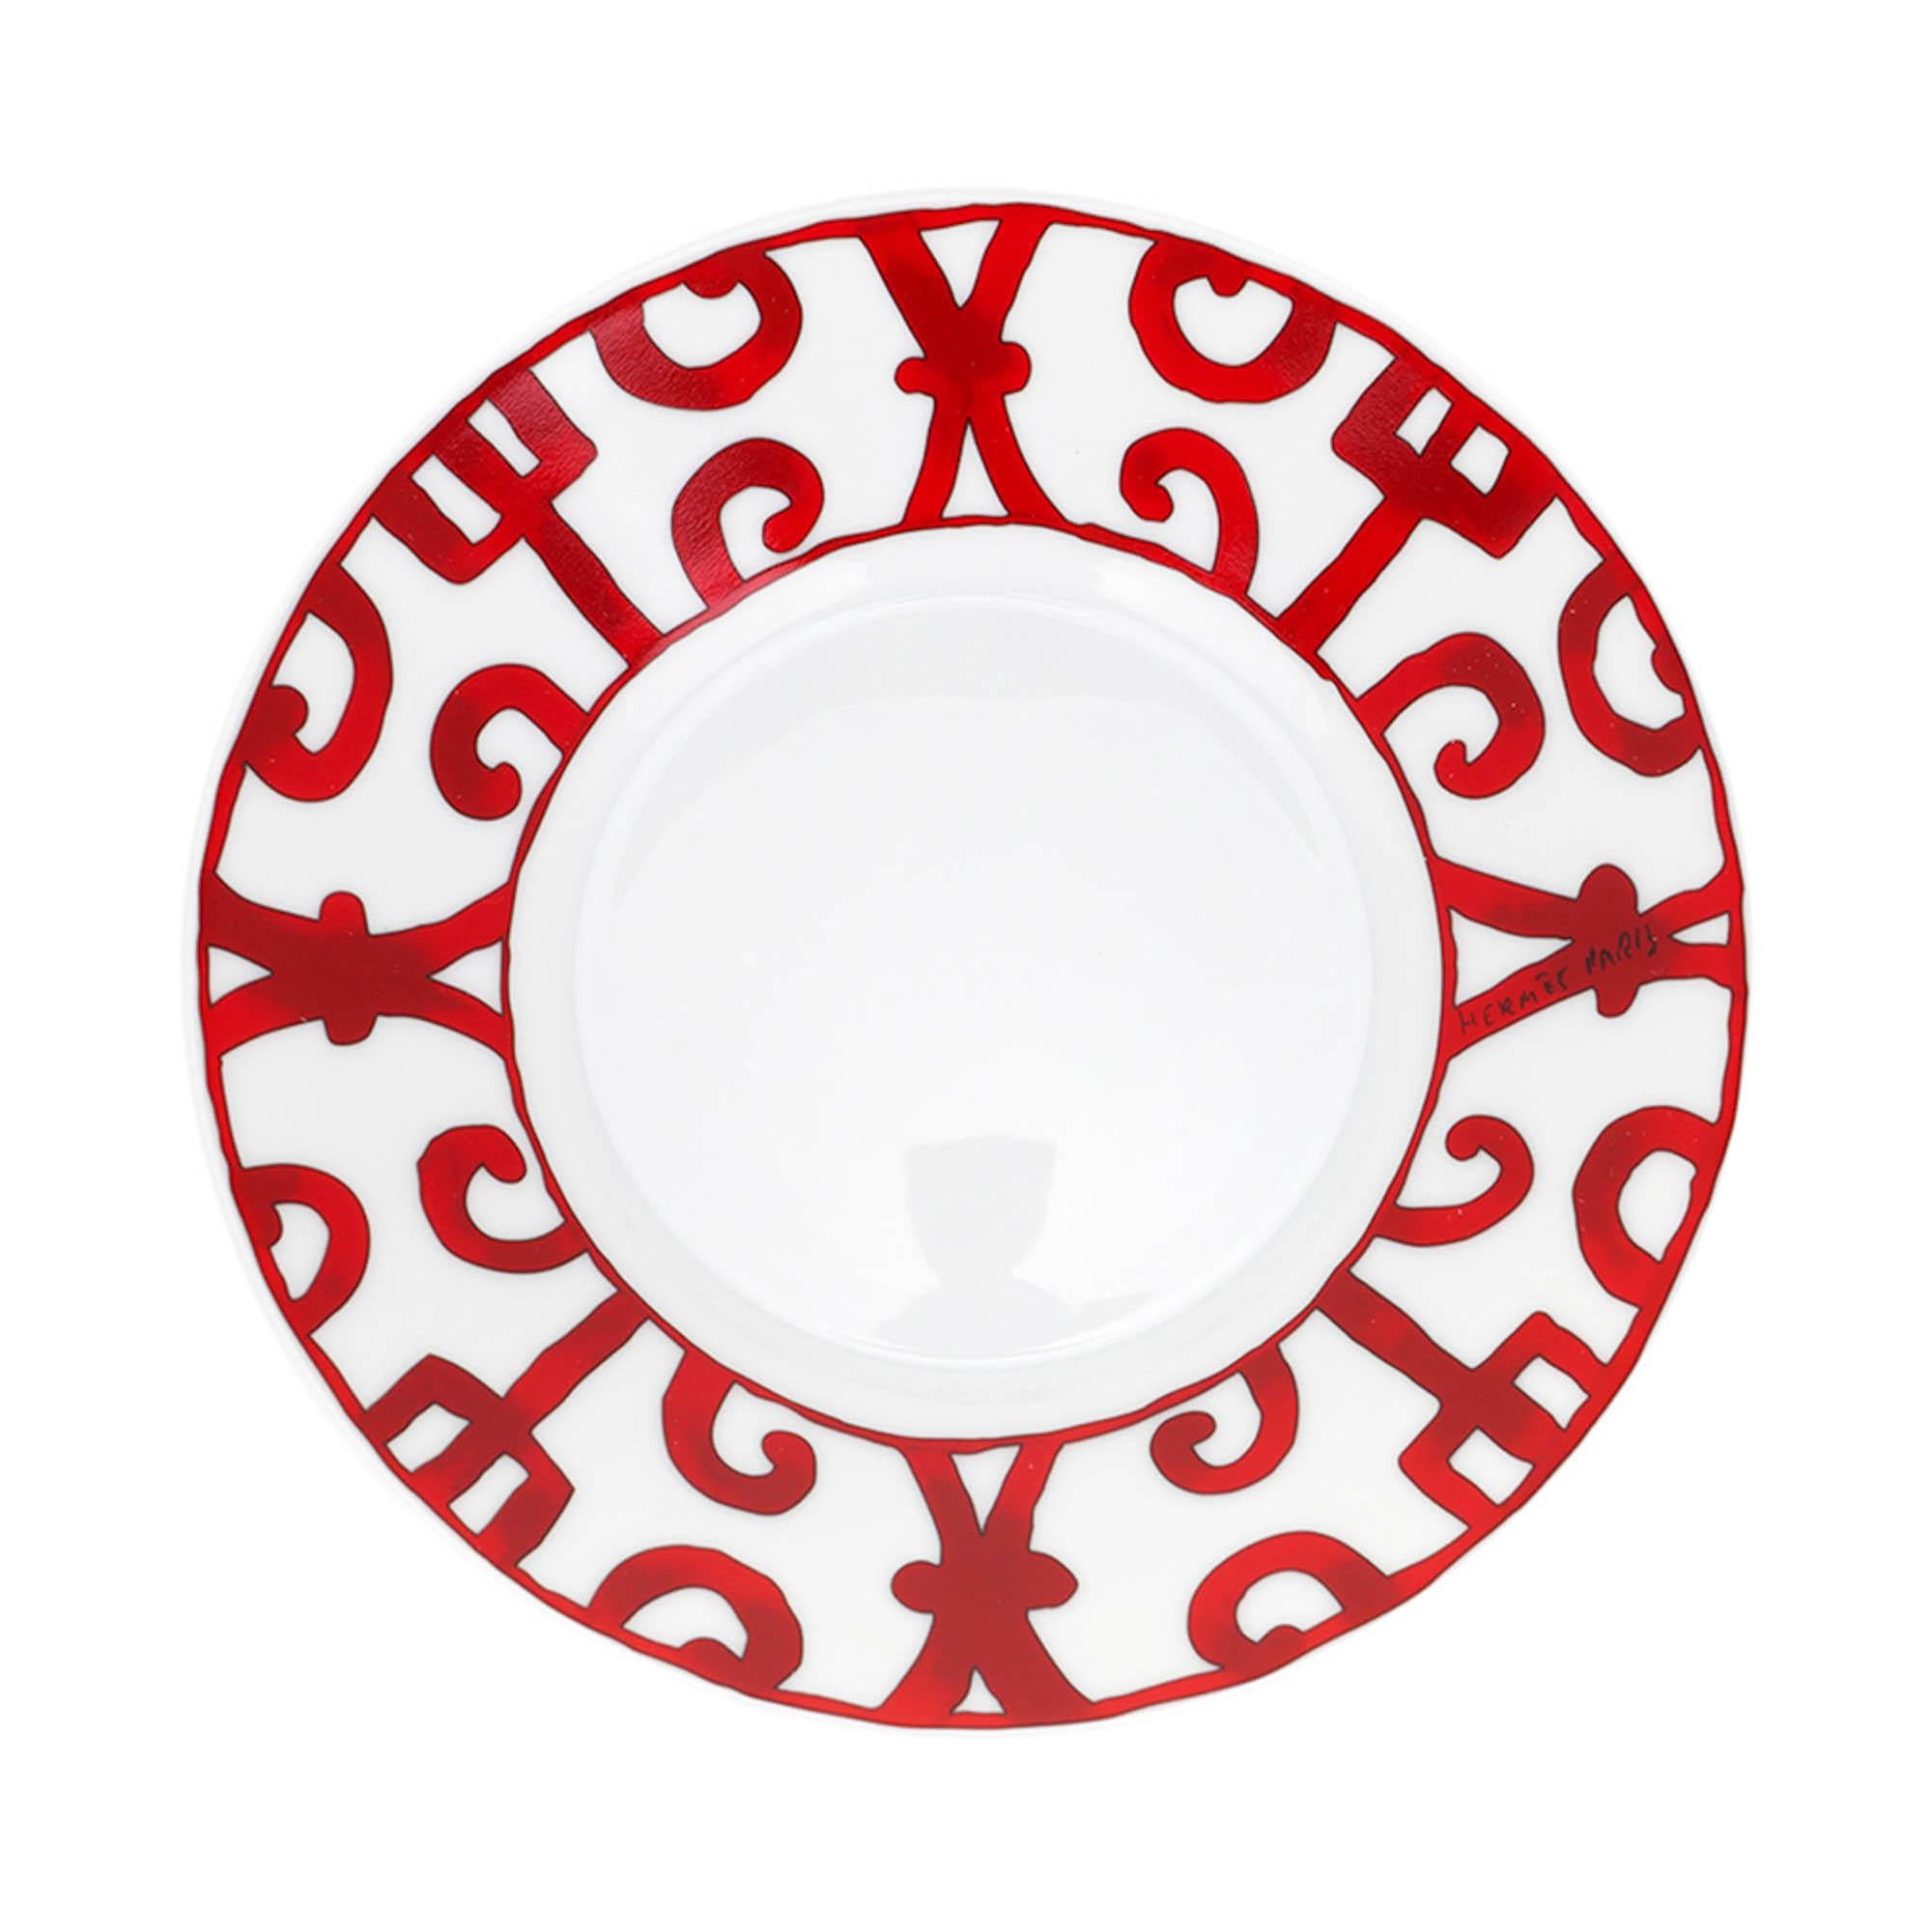 Mightychic offers an Hermes Balcon de Guadalquivir Breakfast Cup and Saucer featured in Red and White Set of two.
Treat yourself to a quiet moment to experience the beauty and joy of Balcon de Guadalquivir porcelain.
Beautiful Spanish motif